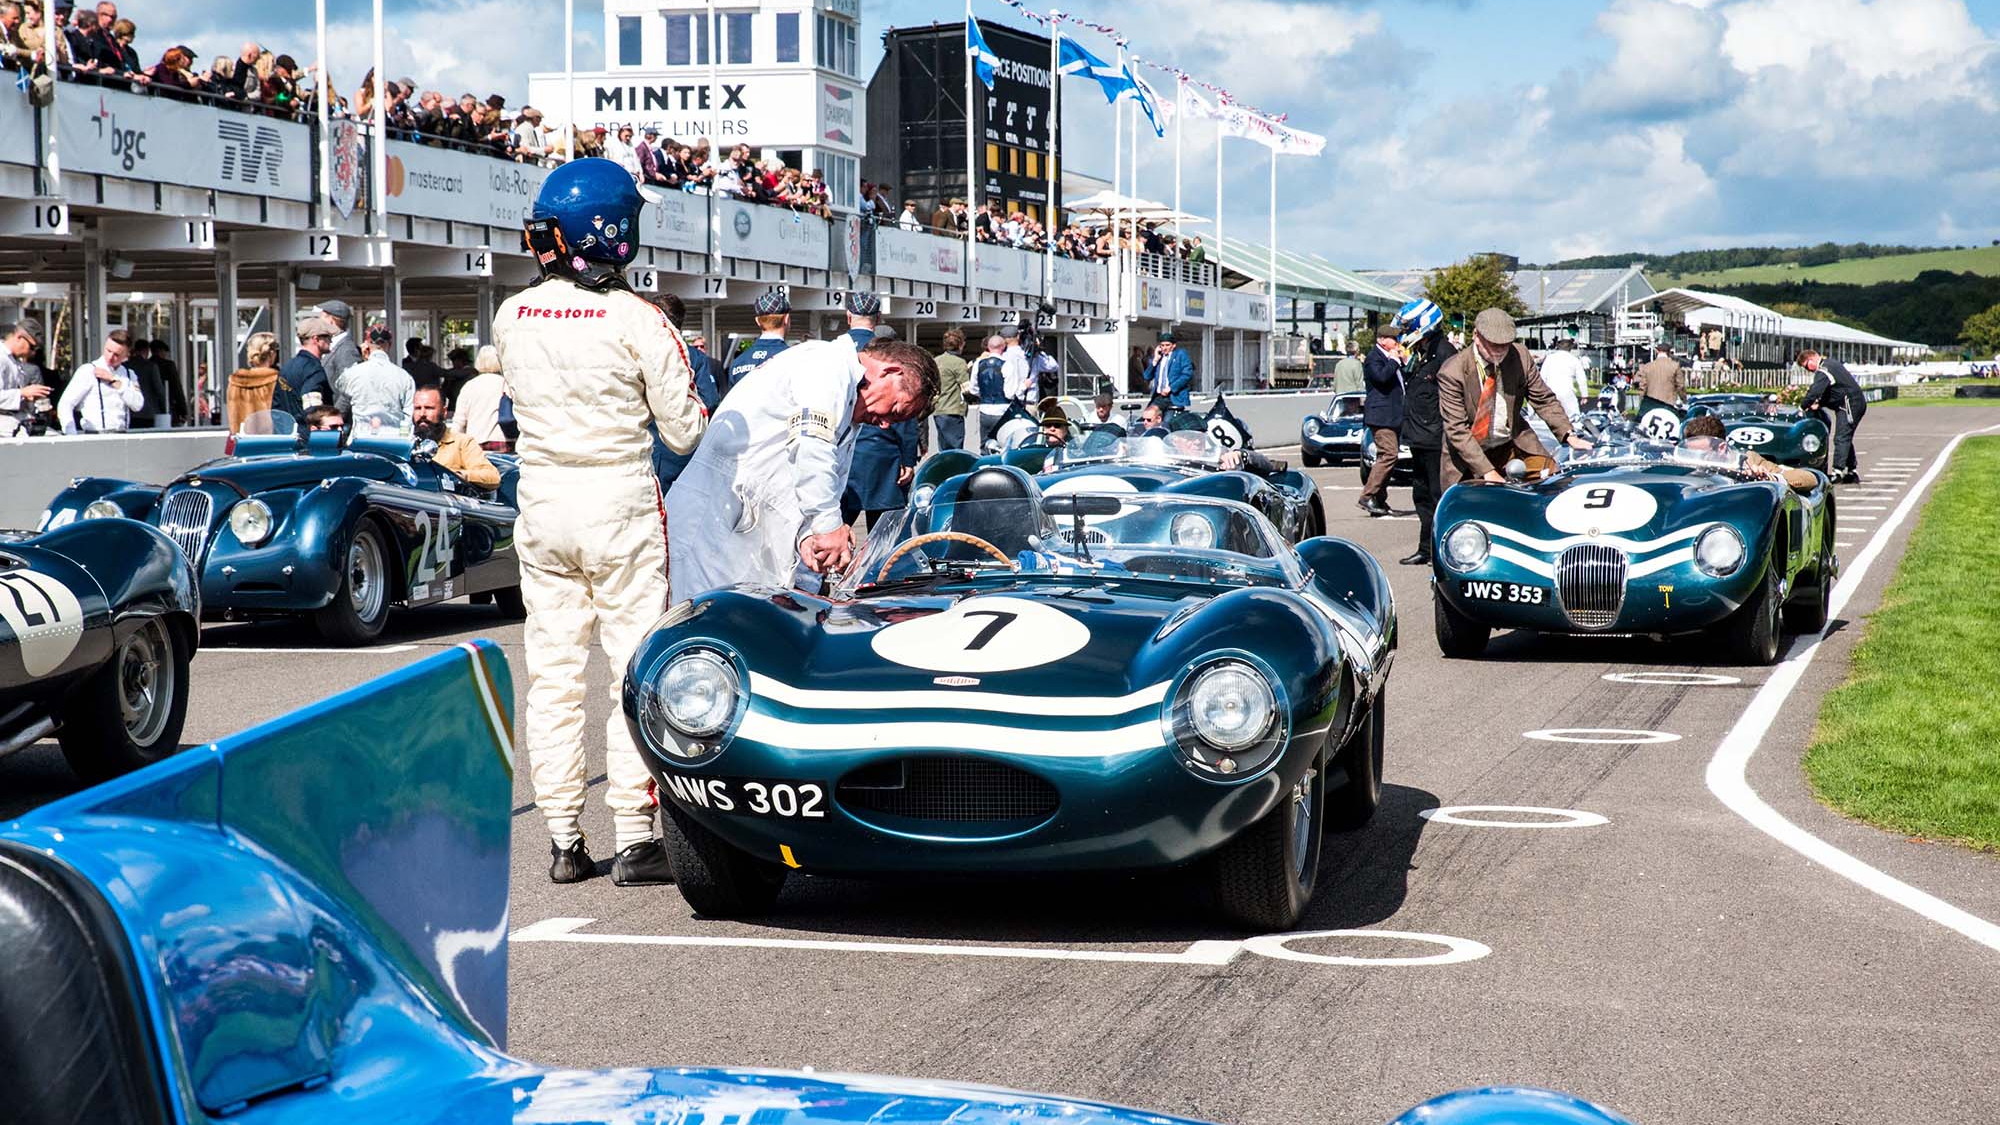 Twenty Magnificent Years of the Goodwood Revival